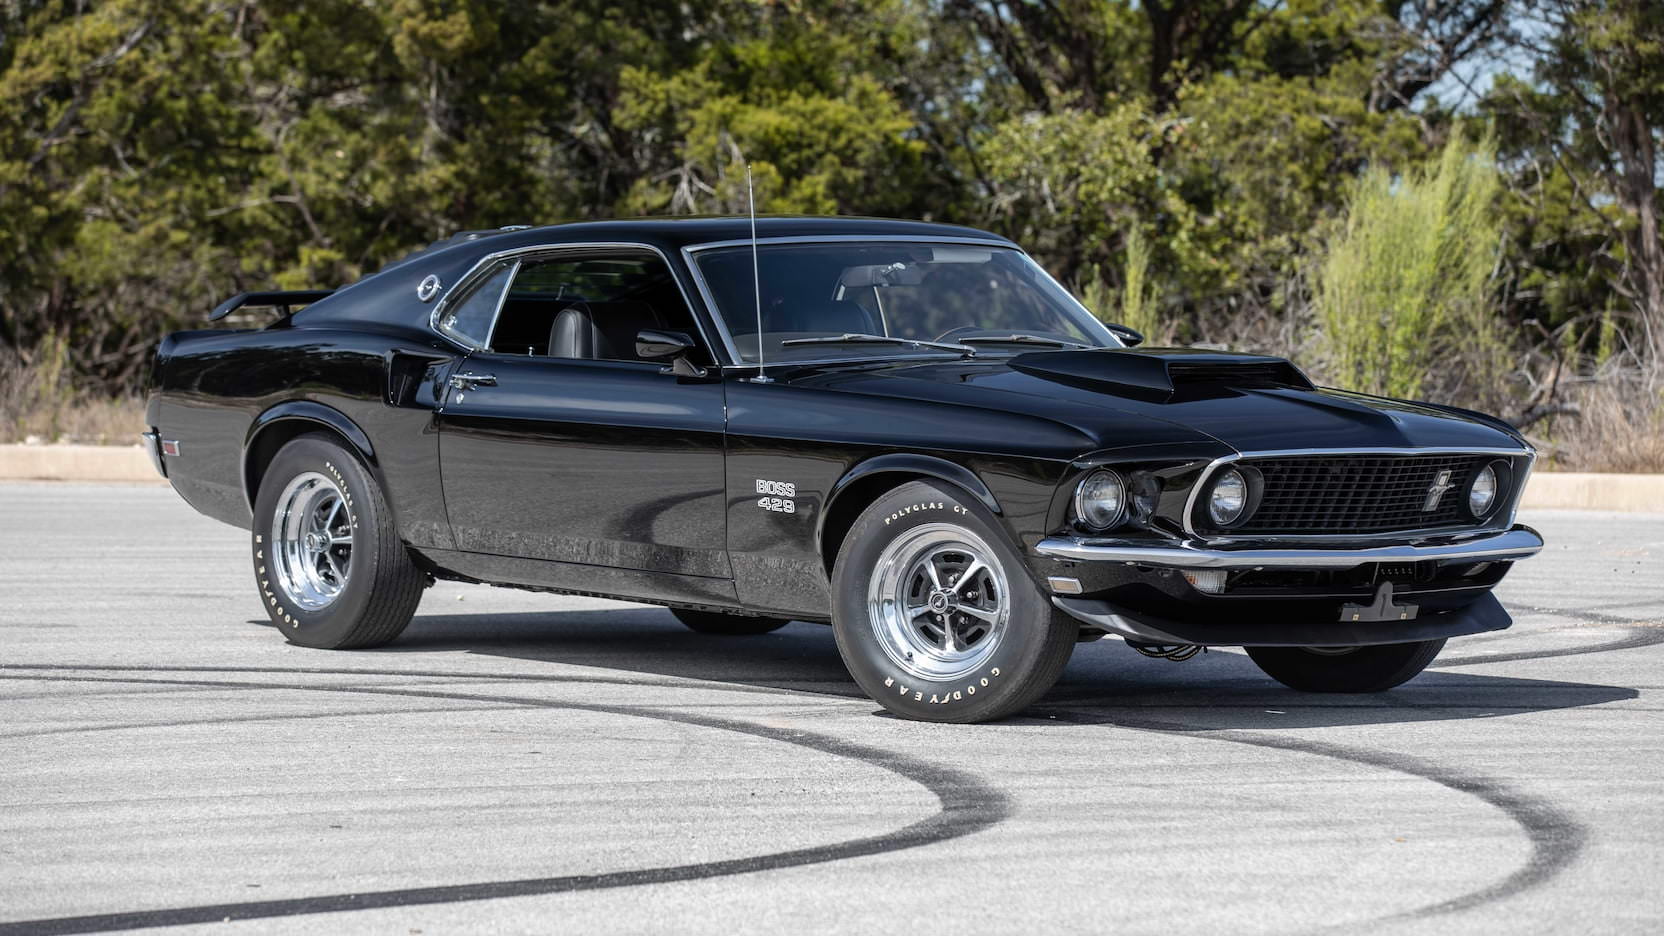 Paul 1969 Ford Boss 429 Is For Sale